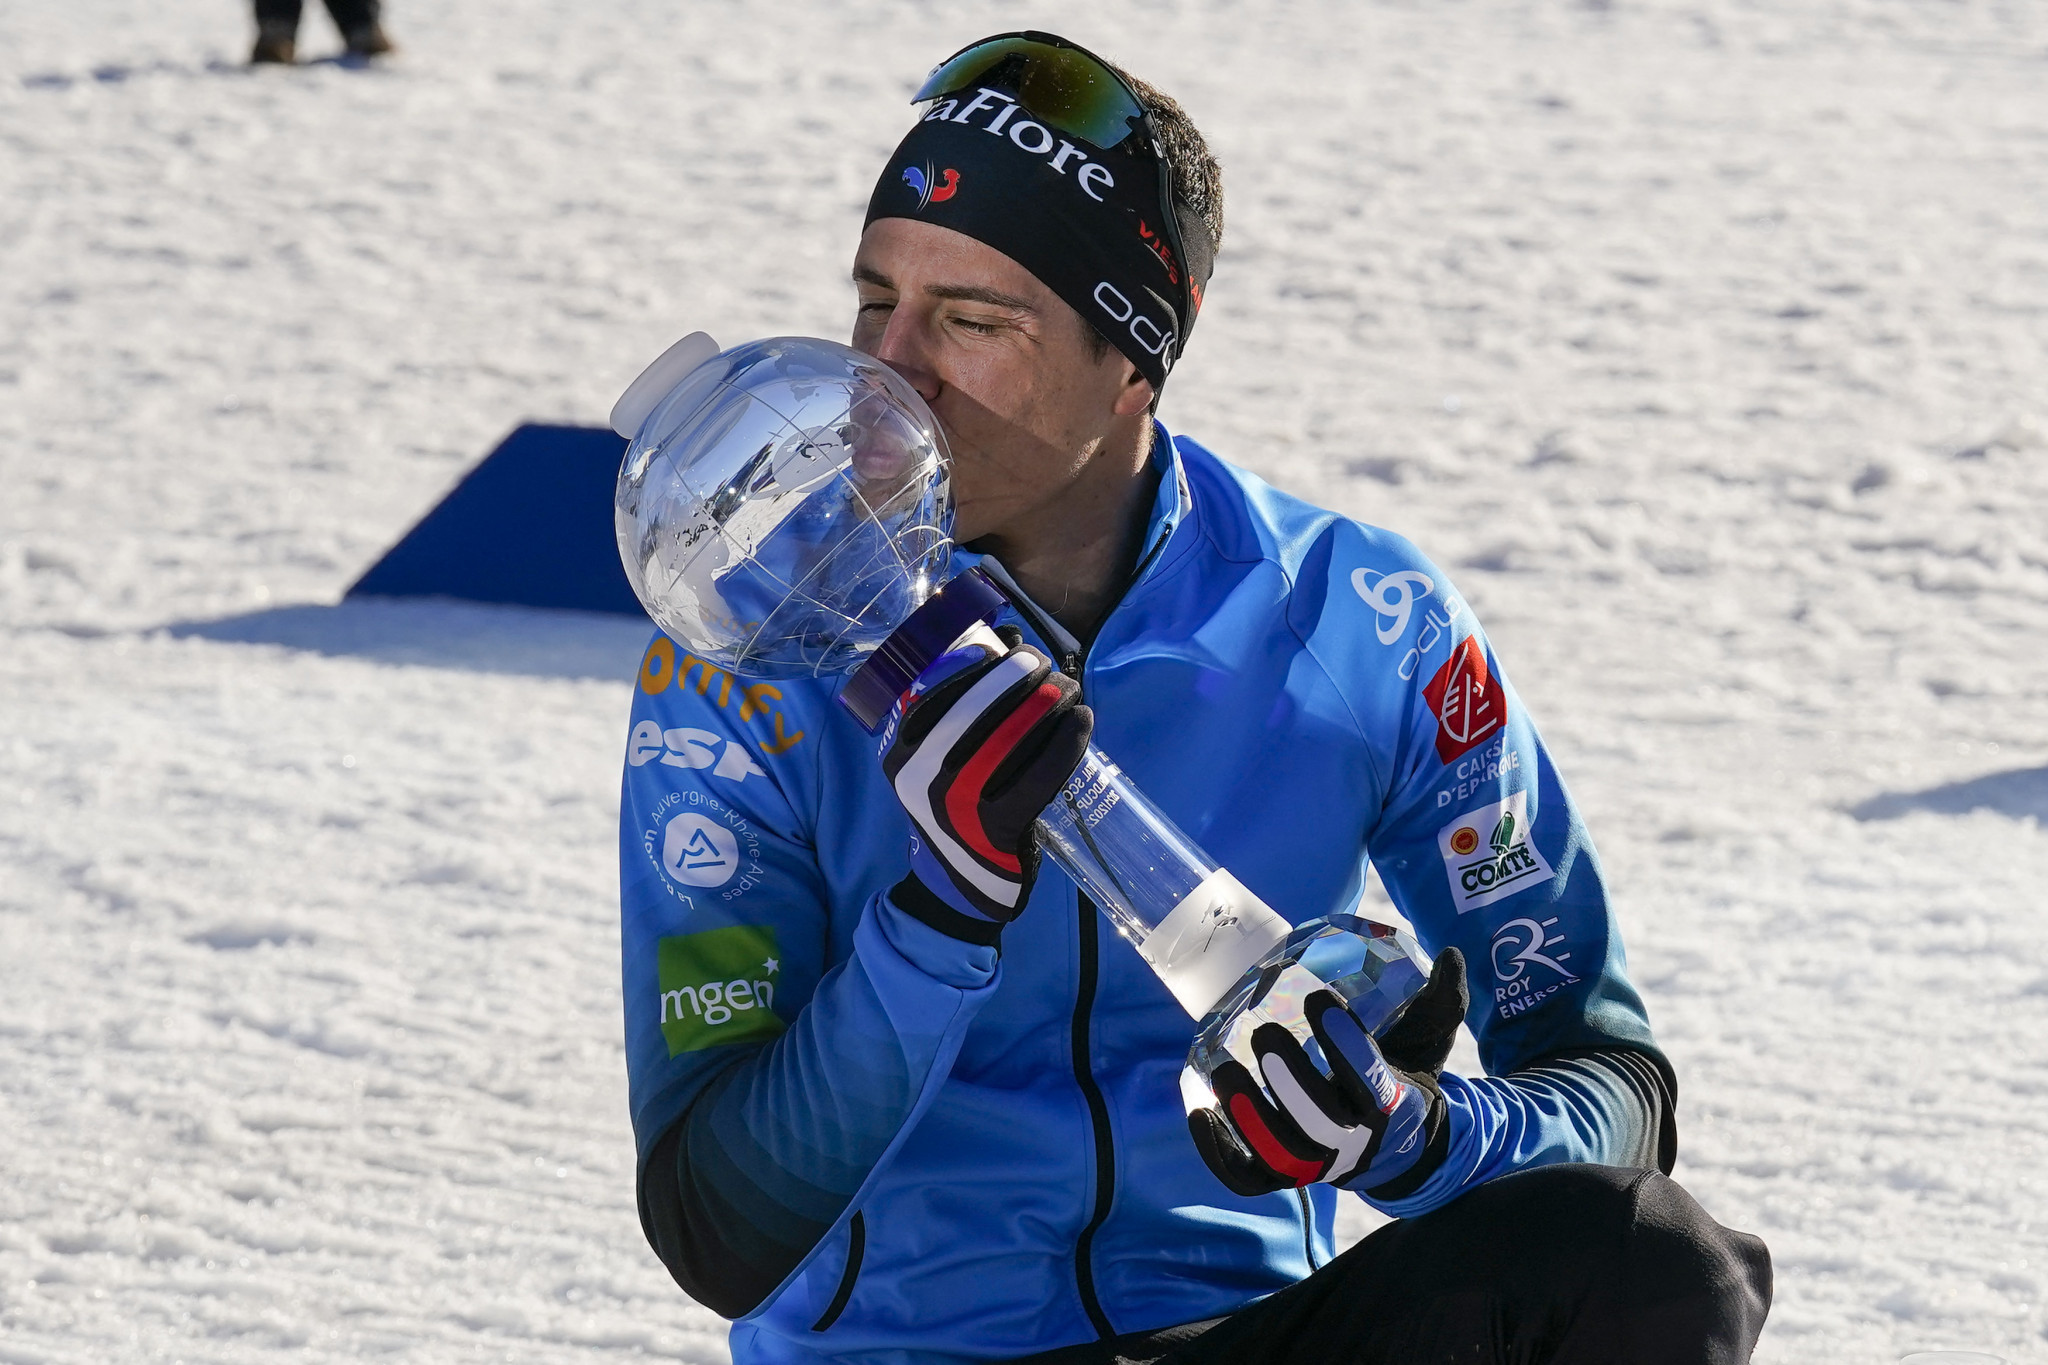 Quentin Fillon Maillet of France celebrates the victory by kissing the long-awaited trophy at the men's 15km mass start event of the IBU Biathlon World Cup in Holmenkollen ©Getty Images